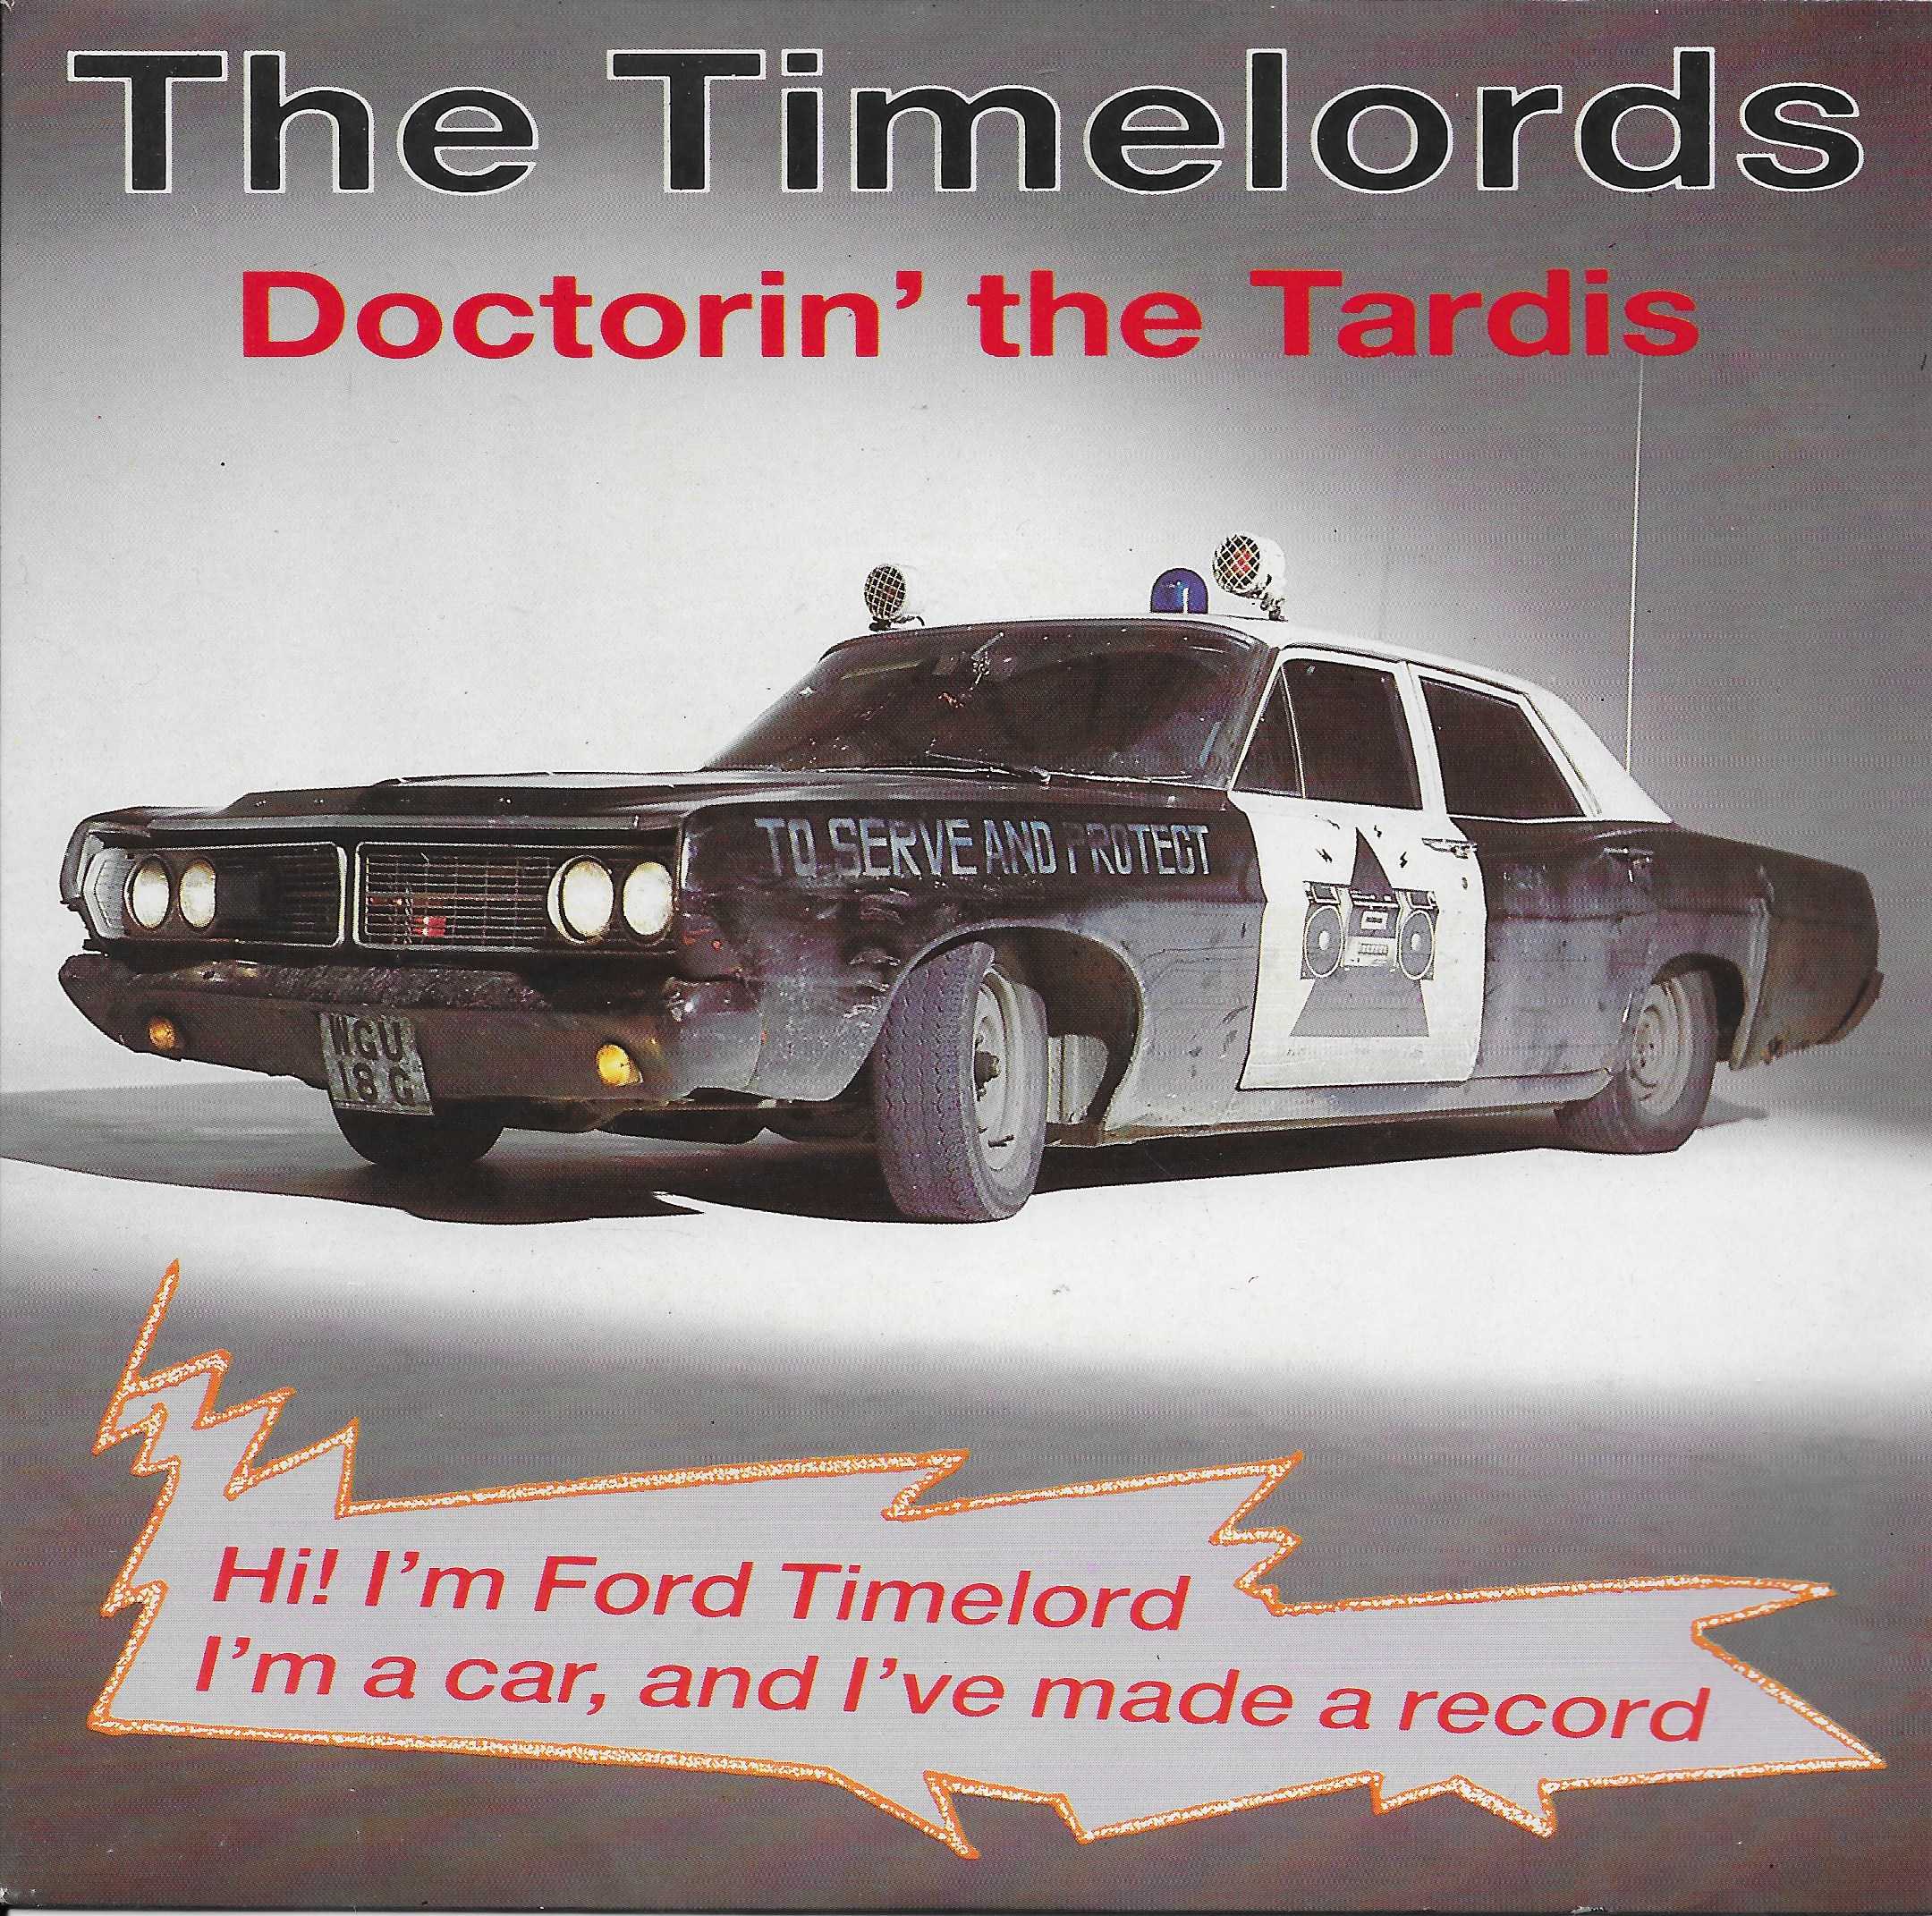 Picture of KLF 003 Doctorin' the Tardis by artist Ron Grainer / The Timelords / KLF from the BBC singles - Records and Tapes library